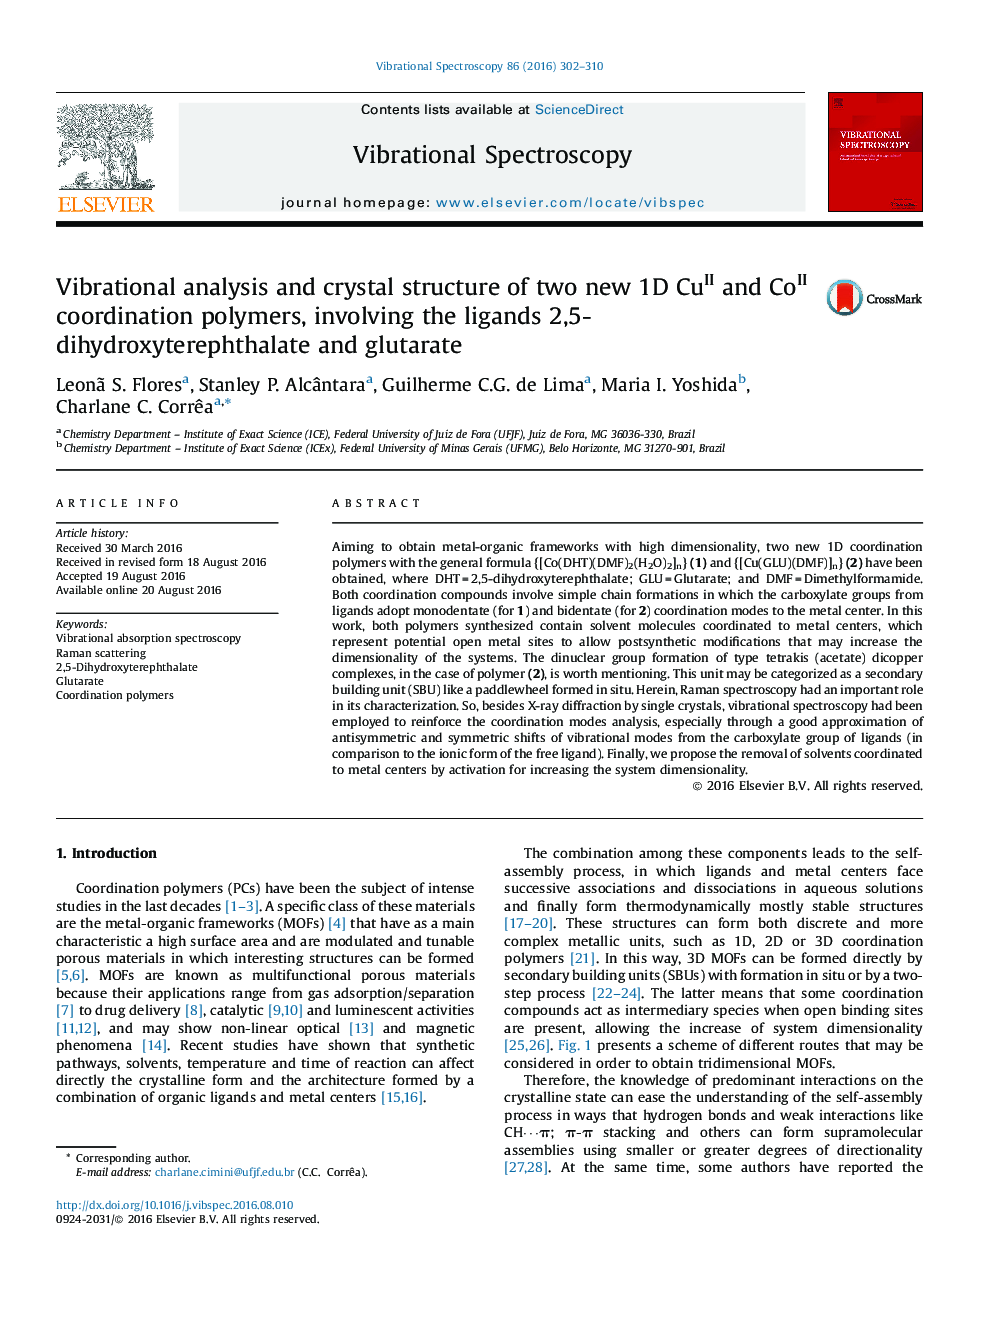 Vibrational analysis and crystal structure of two new 1D CuII and CoII coordination polymers, involving the ligands 2,5-dihydroxyterephthalate and glutarate